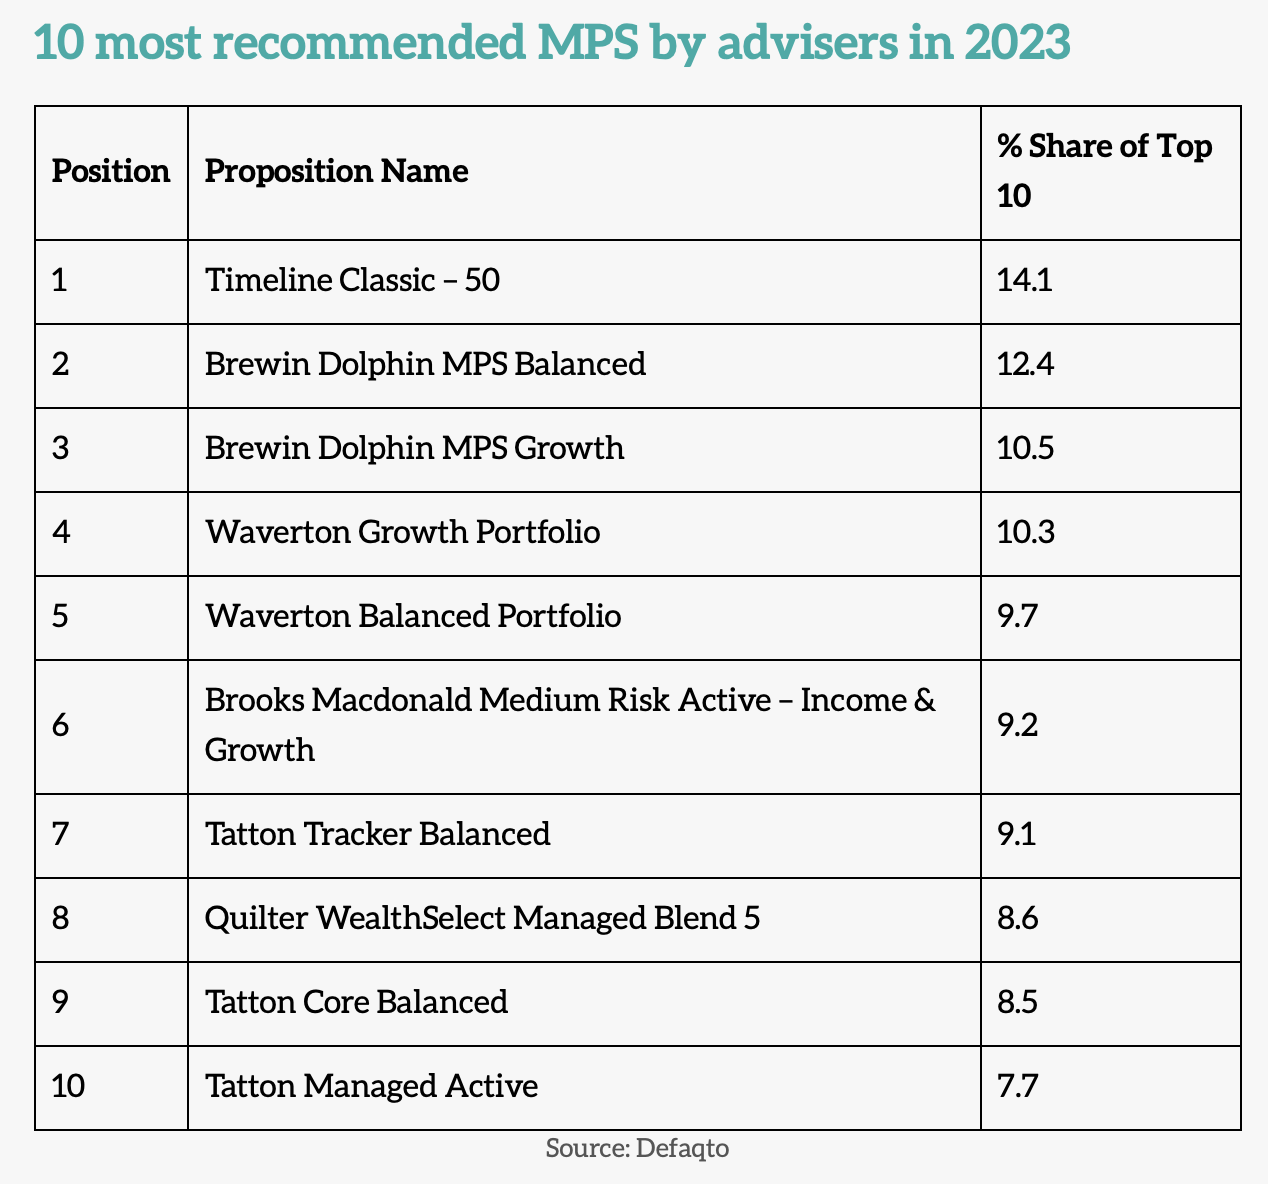 The 10 most recommended MPS by advisers in 2023 according to Defaqto